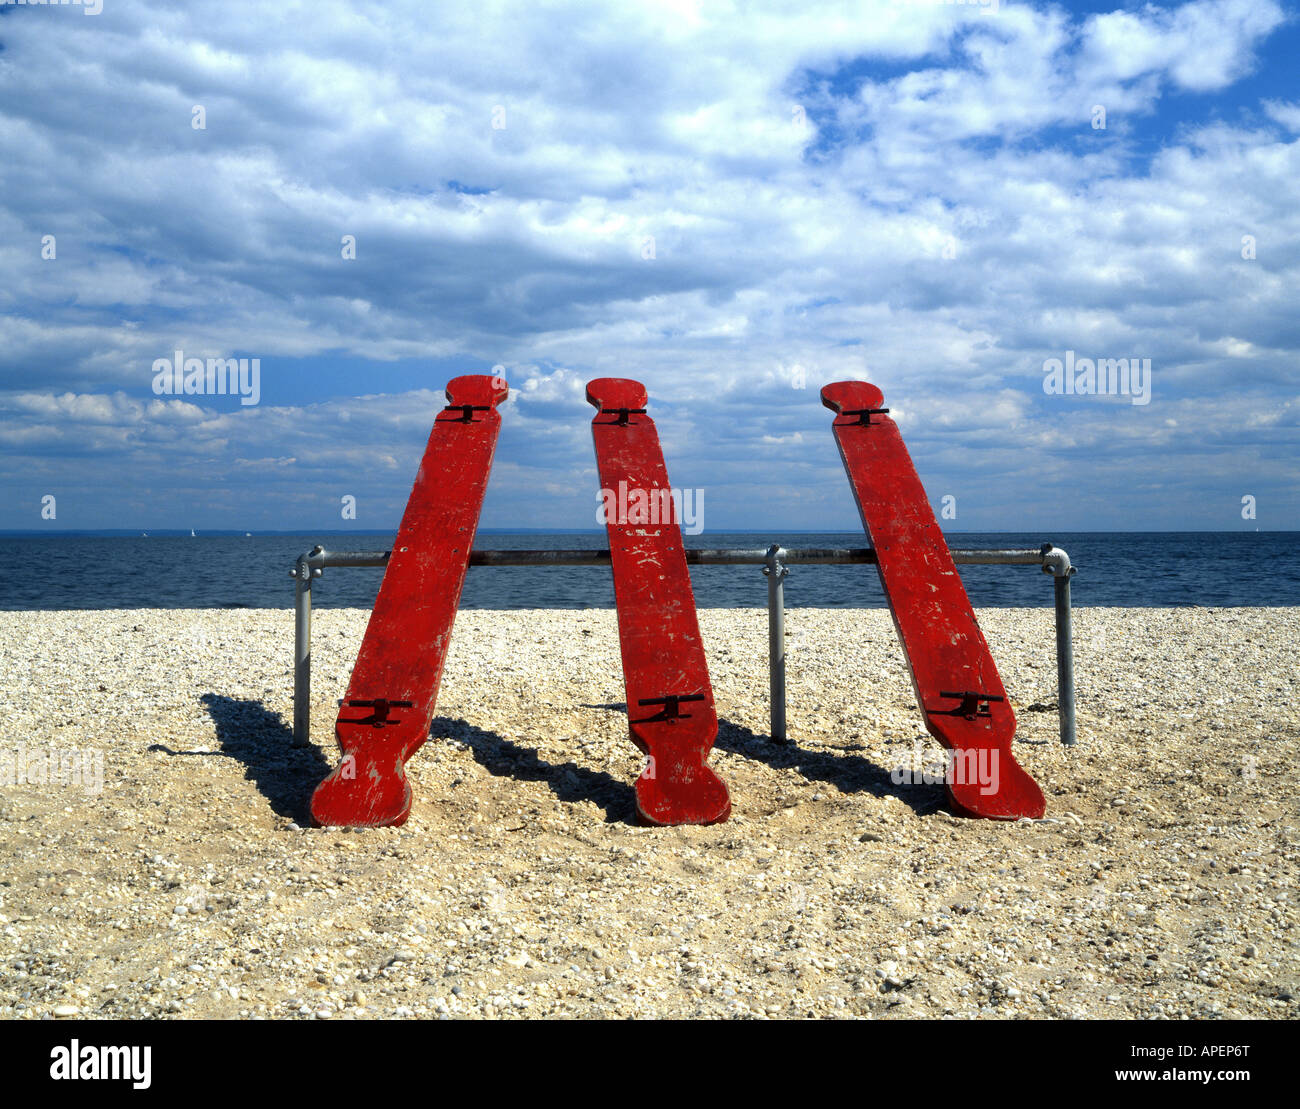 Three red see-saws on a beach in New York Stock Photo - Alamy